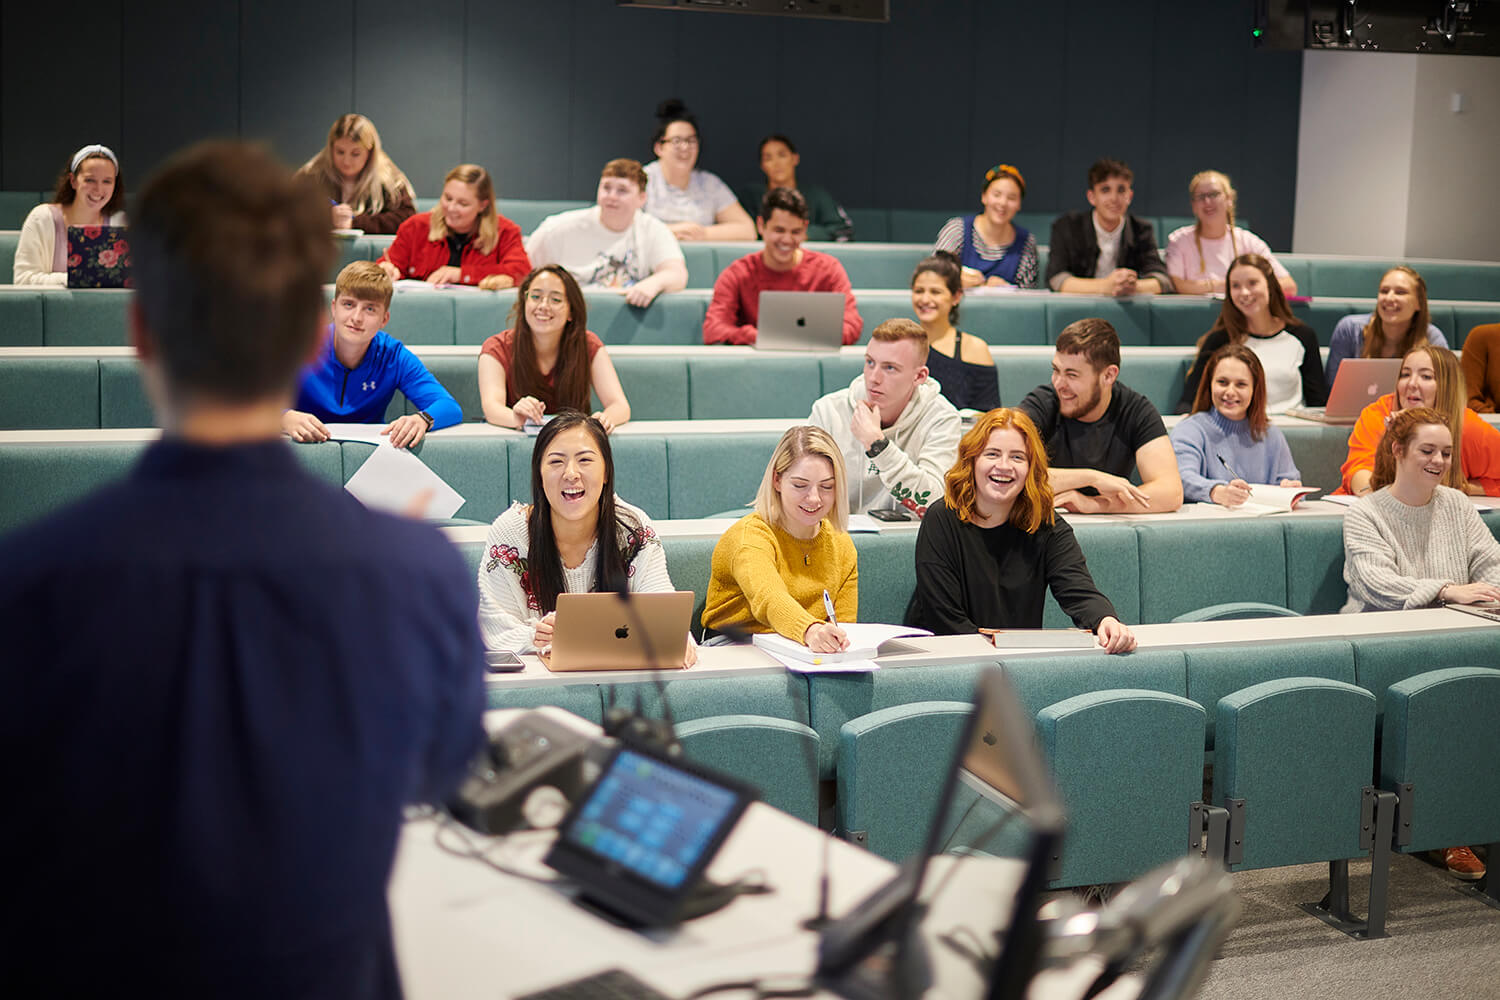 A lecturer addresses a class of students in a Harvard-style lecture theatre.